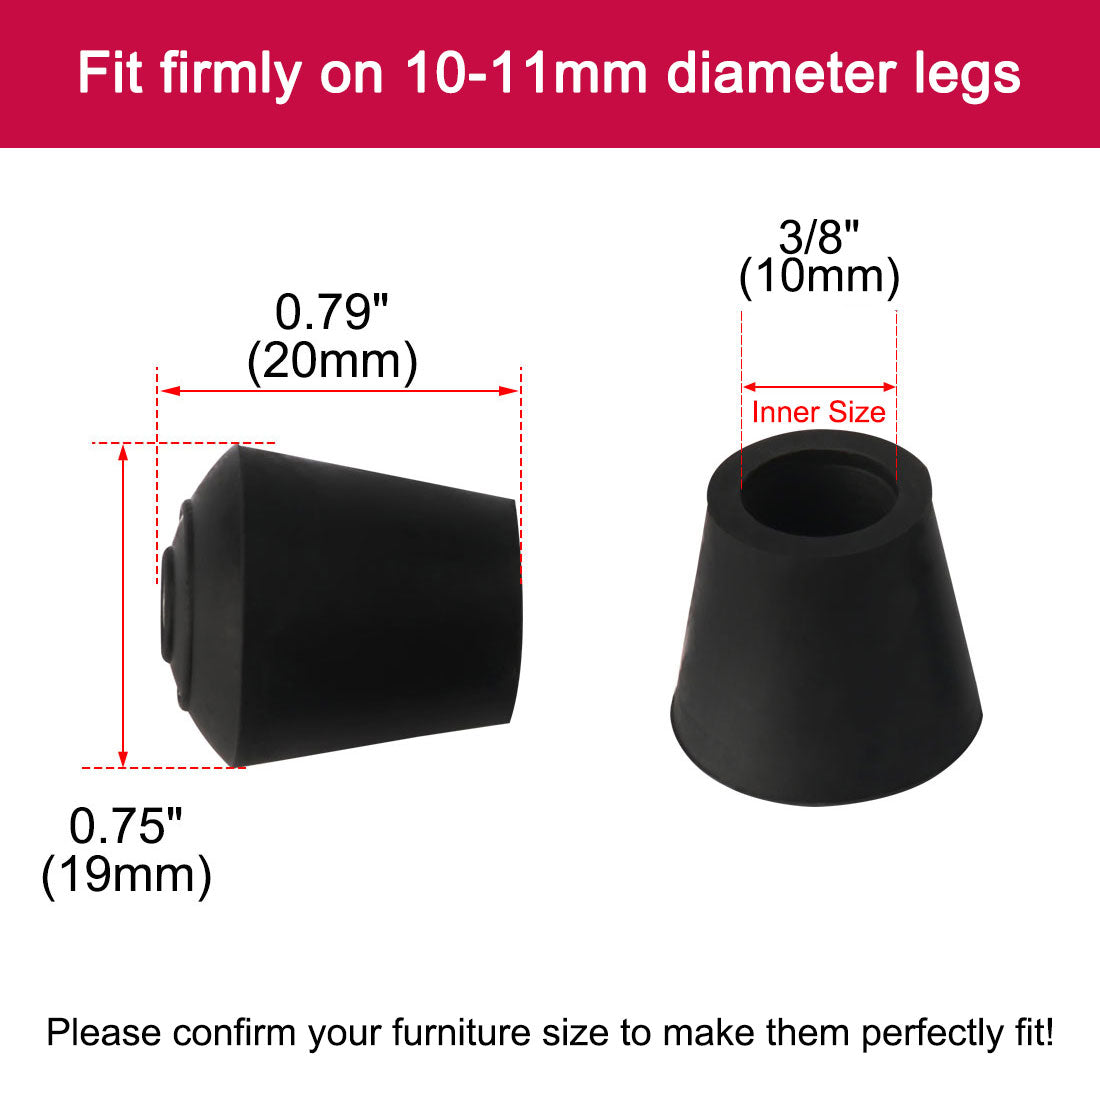 uxcell Uxcell Rubber Leg Cap Tip Cup Feet Cover 10mm 3/8" Inner Dia 36pcs for Furniture Chair